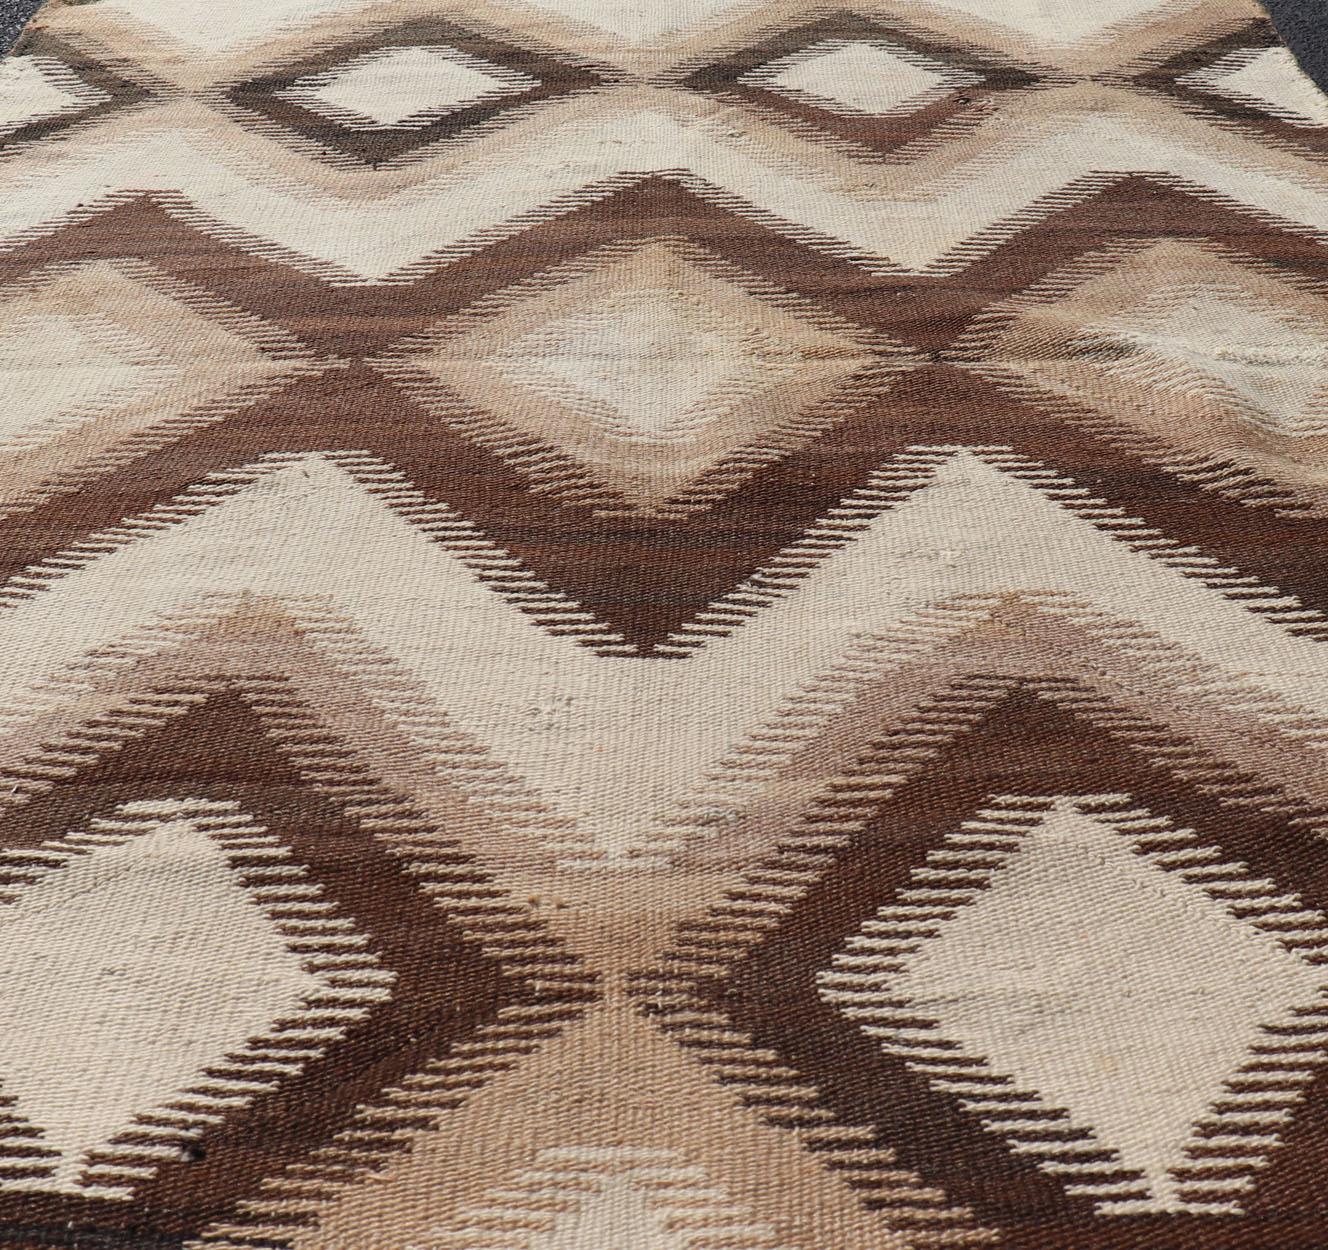 Measures: 3'9 x 5'7 
American Navajo Rug with Geometric Diamond All-Over Design in Tan, Brown, Cream. Keivan Woven Arts / rug W22-0901, country of origin / type: United States of America / Navajo, circa early-20th Century.

This intriguing vintage